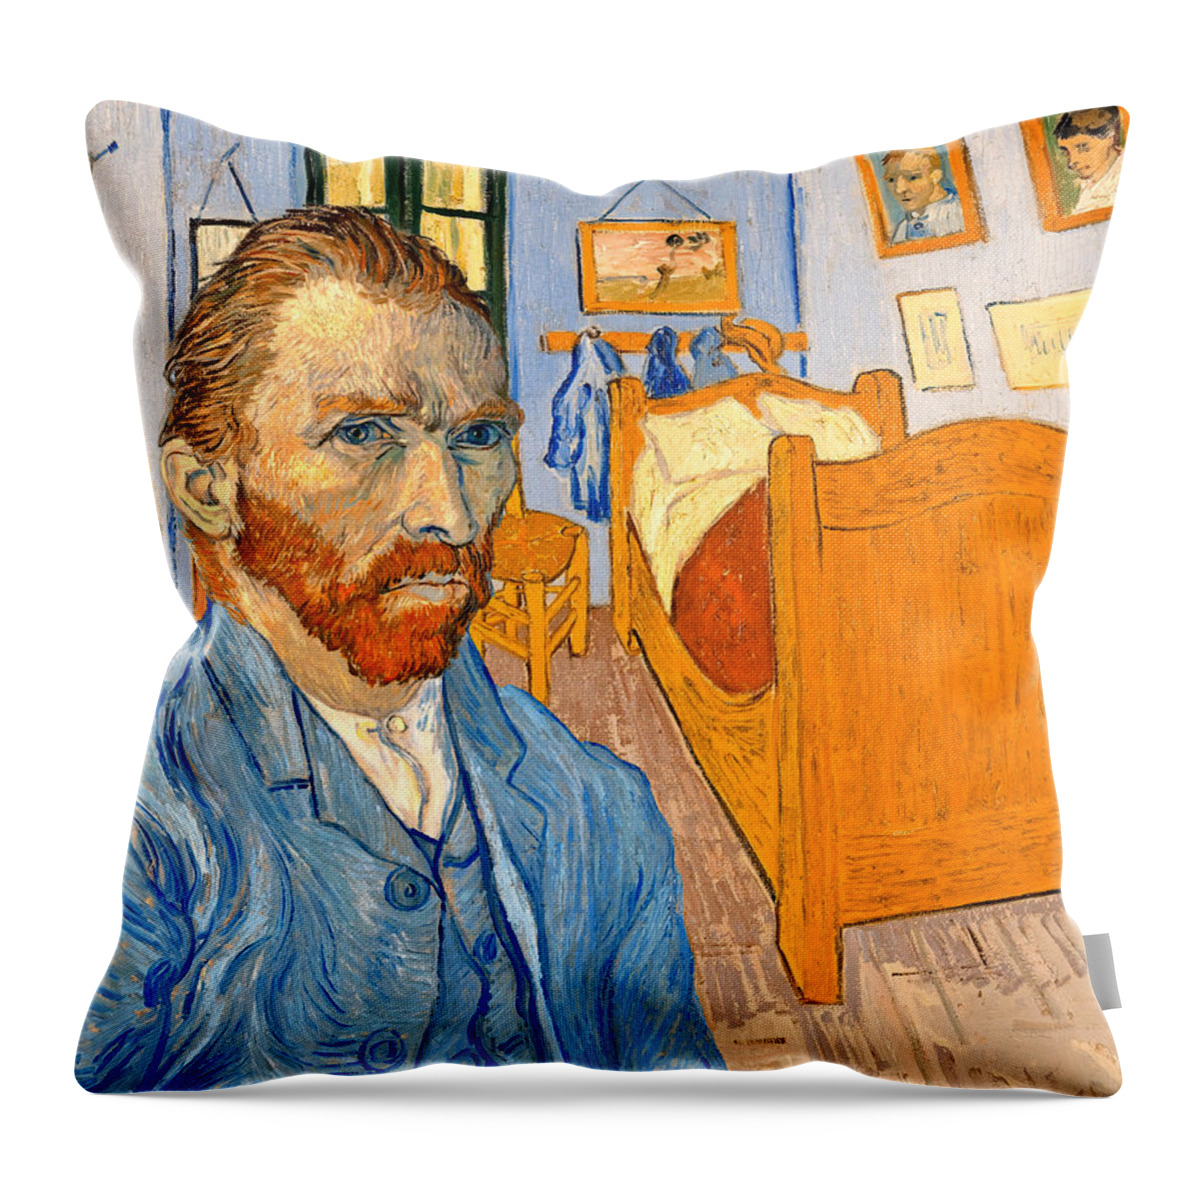 Bedroom In Arles Throw Pillow featuring the digital art The self-portrait of Vincent van Gogh in front of the Bedroom in Arles - digital recreation by Nicko Prints